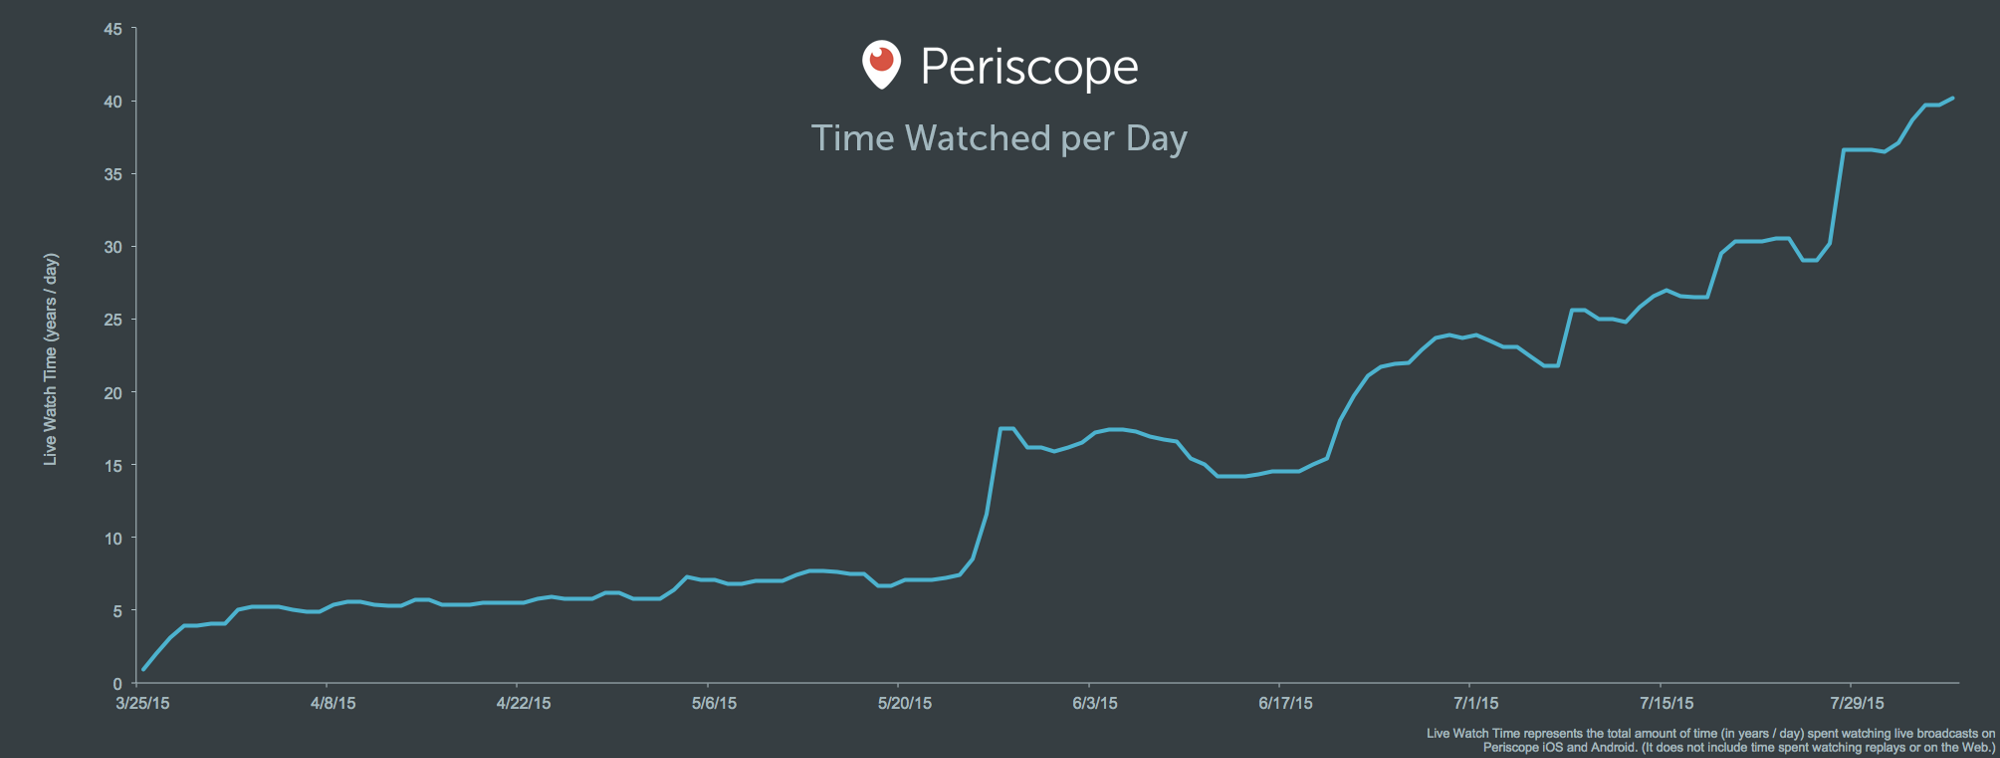 Periscope now has 10 million users who watch 40 years of content daily